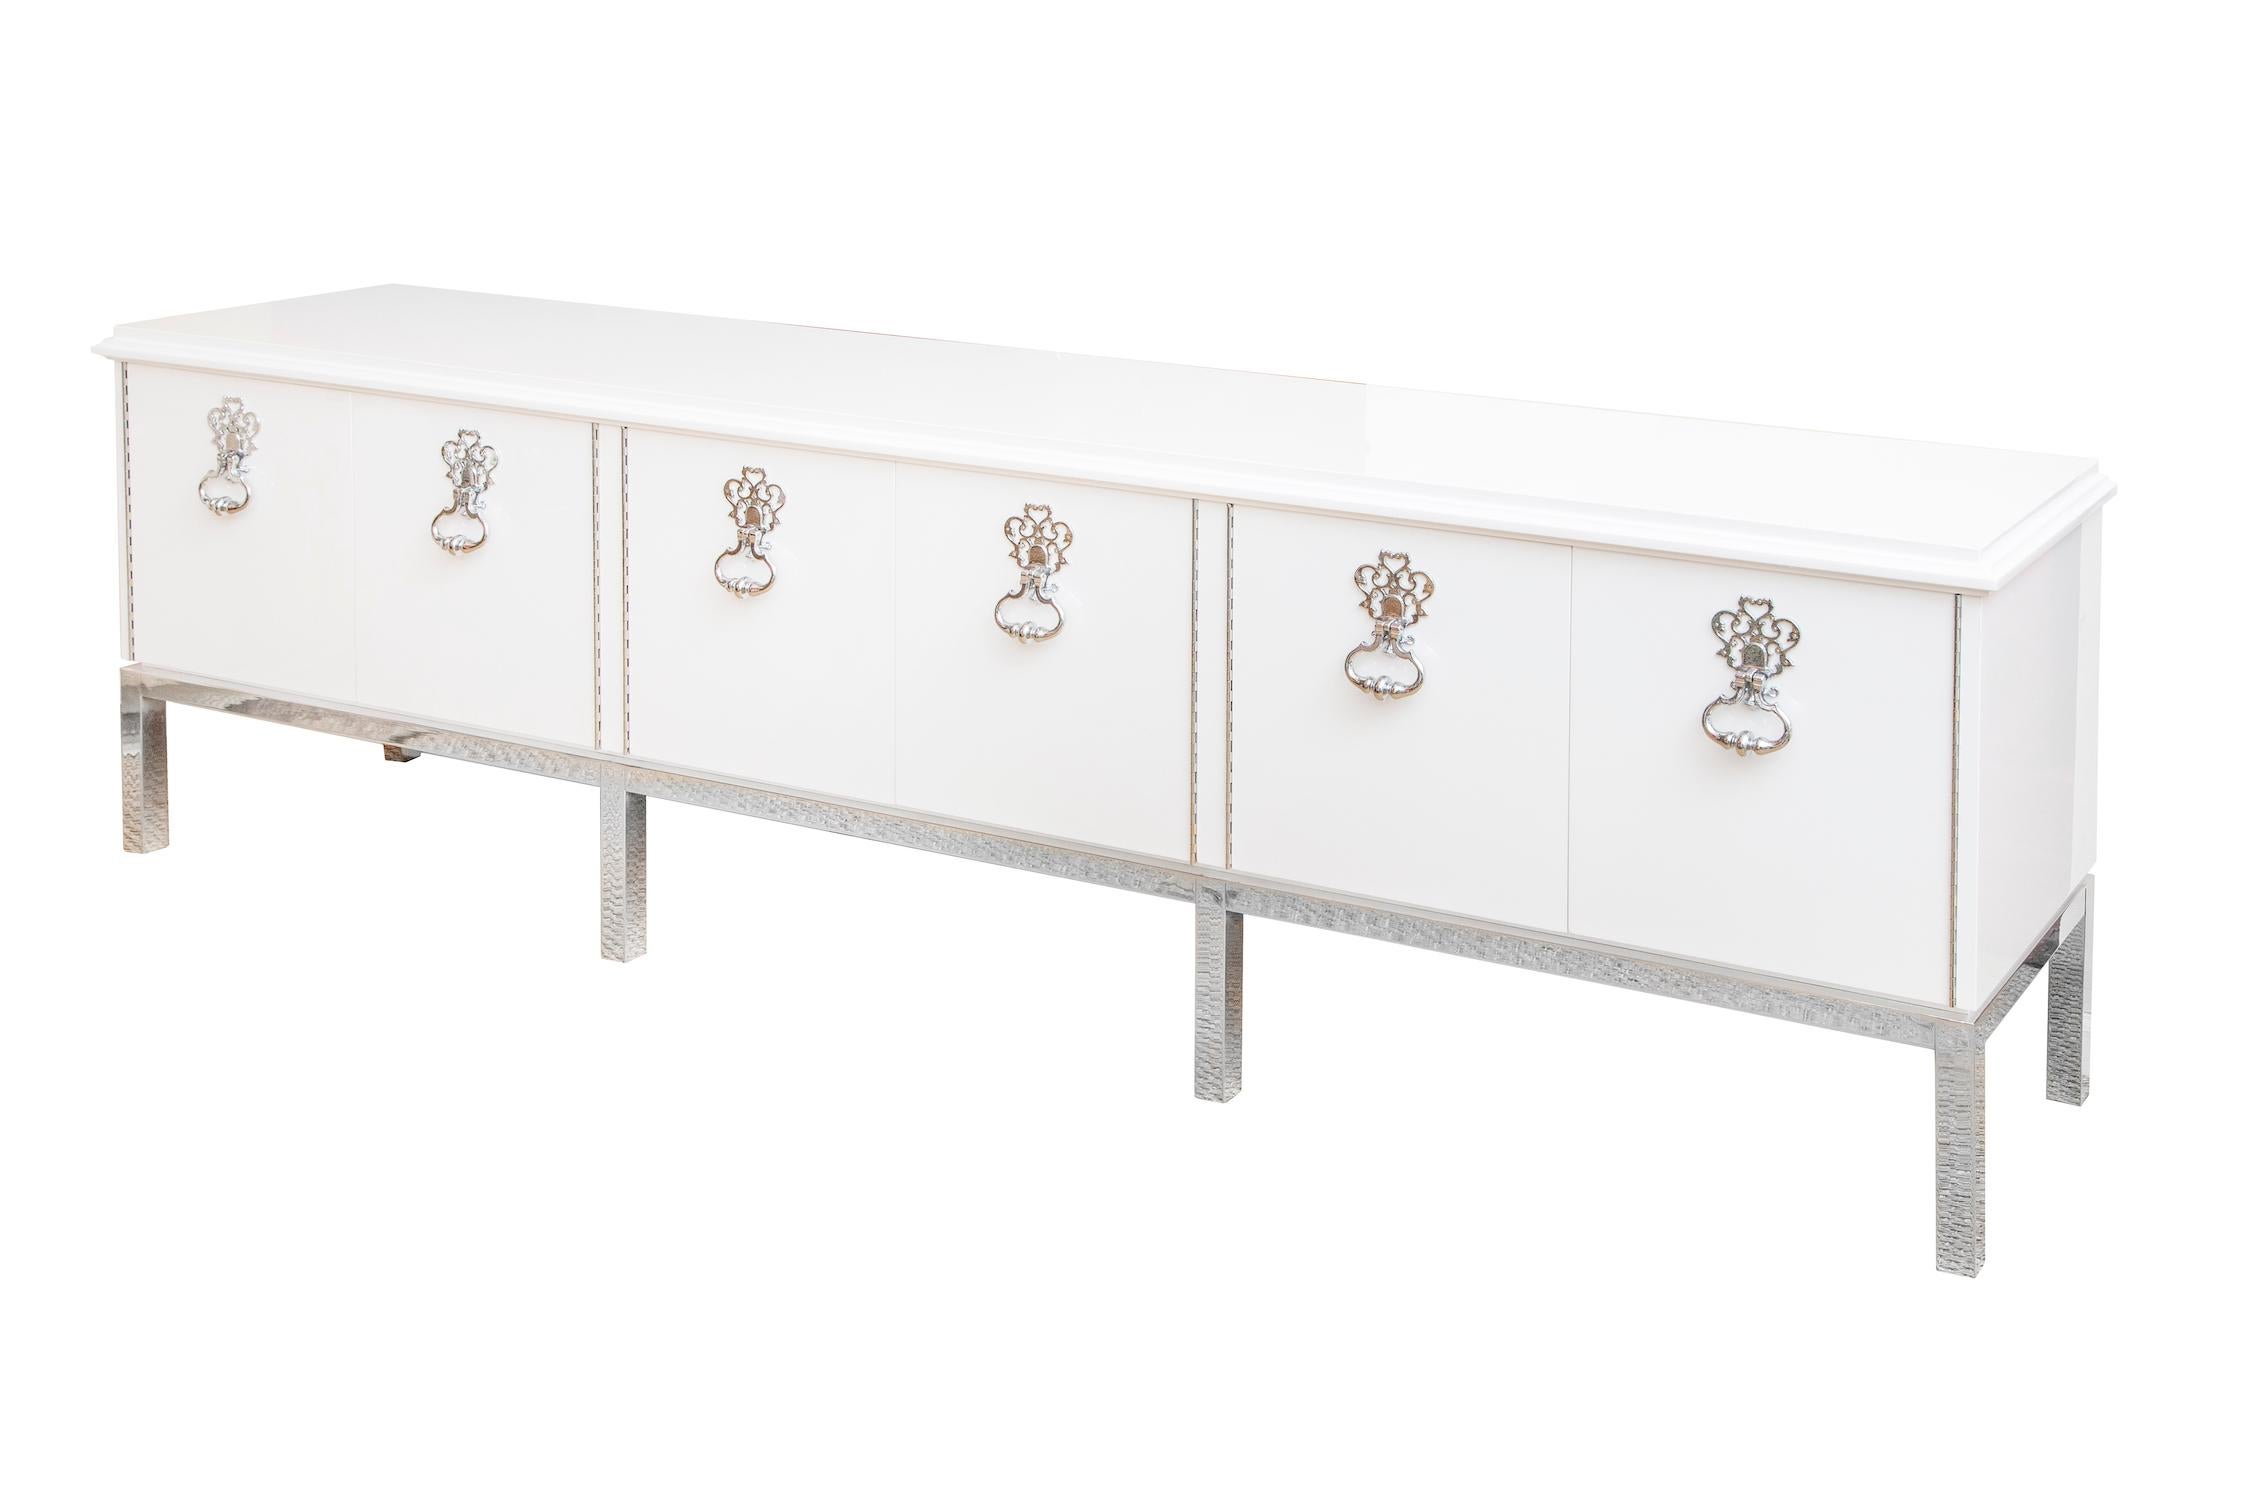 This absolutely stunning very gloriously restored Mastercraft white lacquered over mahogany wood long cabinet, buffet or console was a custom piece at the time of 1975. This magnificent piece has door knocker chrome plated over bronze dramatic